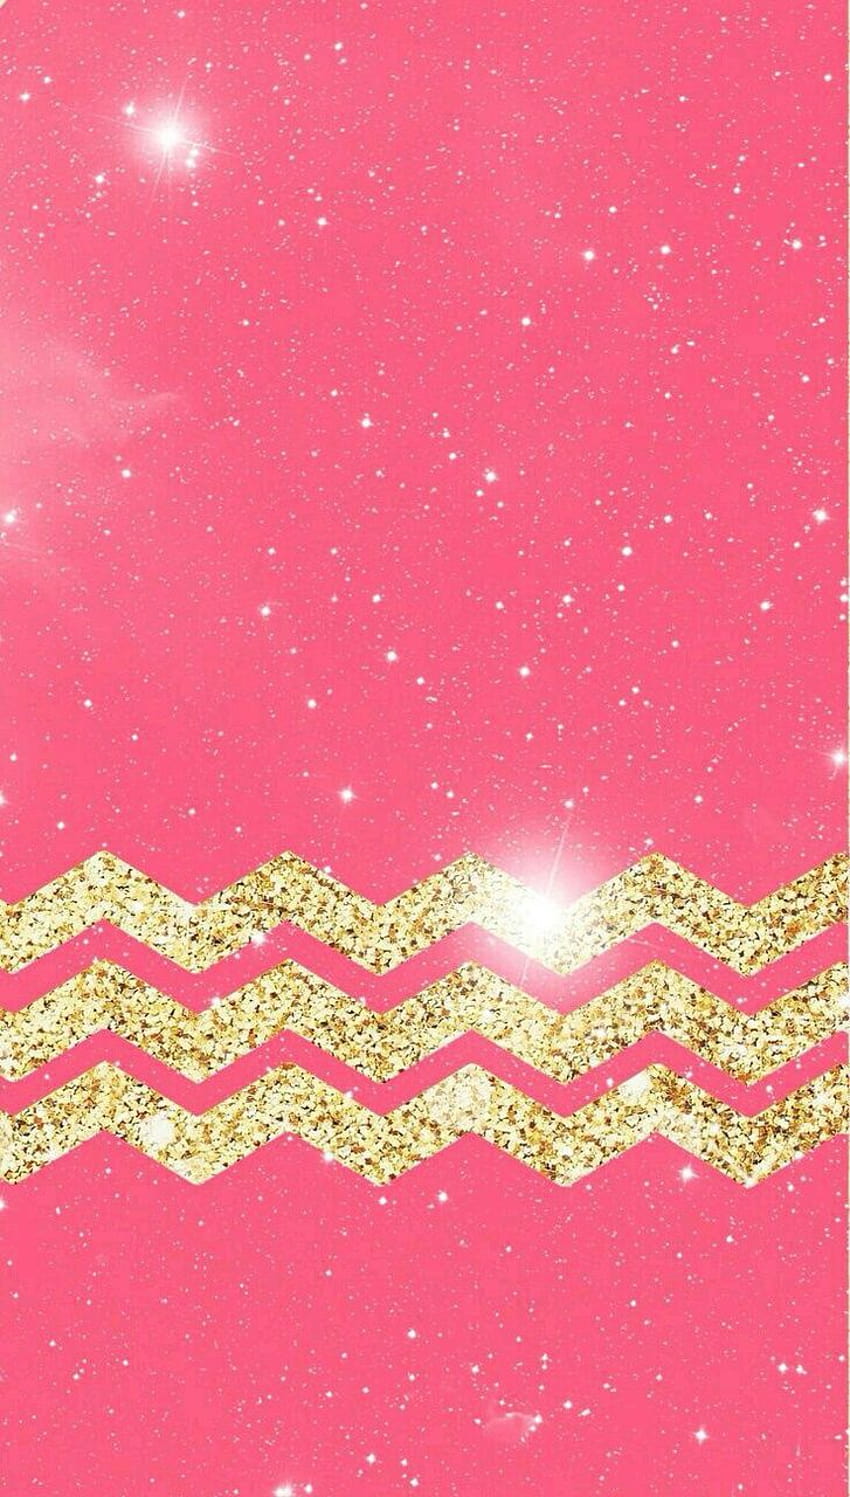 art, background, beautiful, beauty, color, colorful, design, glitter, gold, gold glitter, light, lights, metall, pastel, pattern, style, texture, we heart it, white background, pink background, beautiful art, pastel color, glitter, pink gold HD phone wallpaper